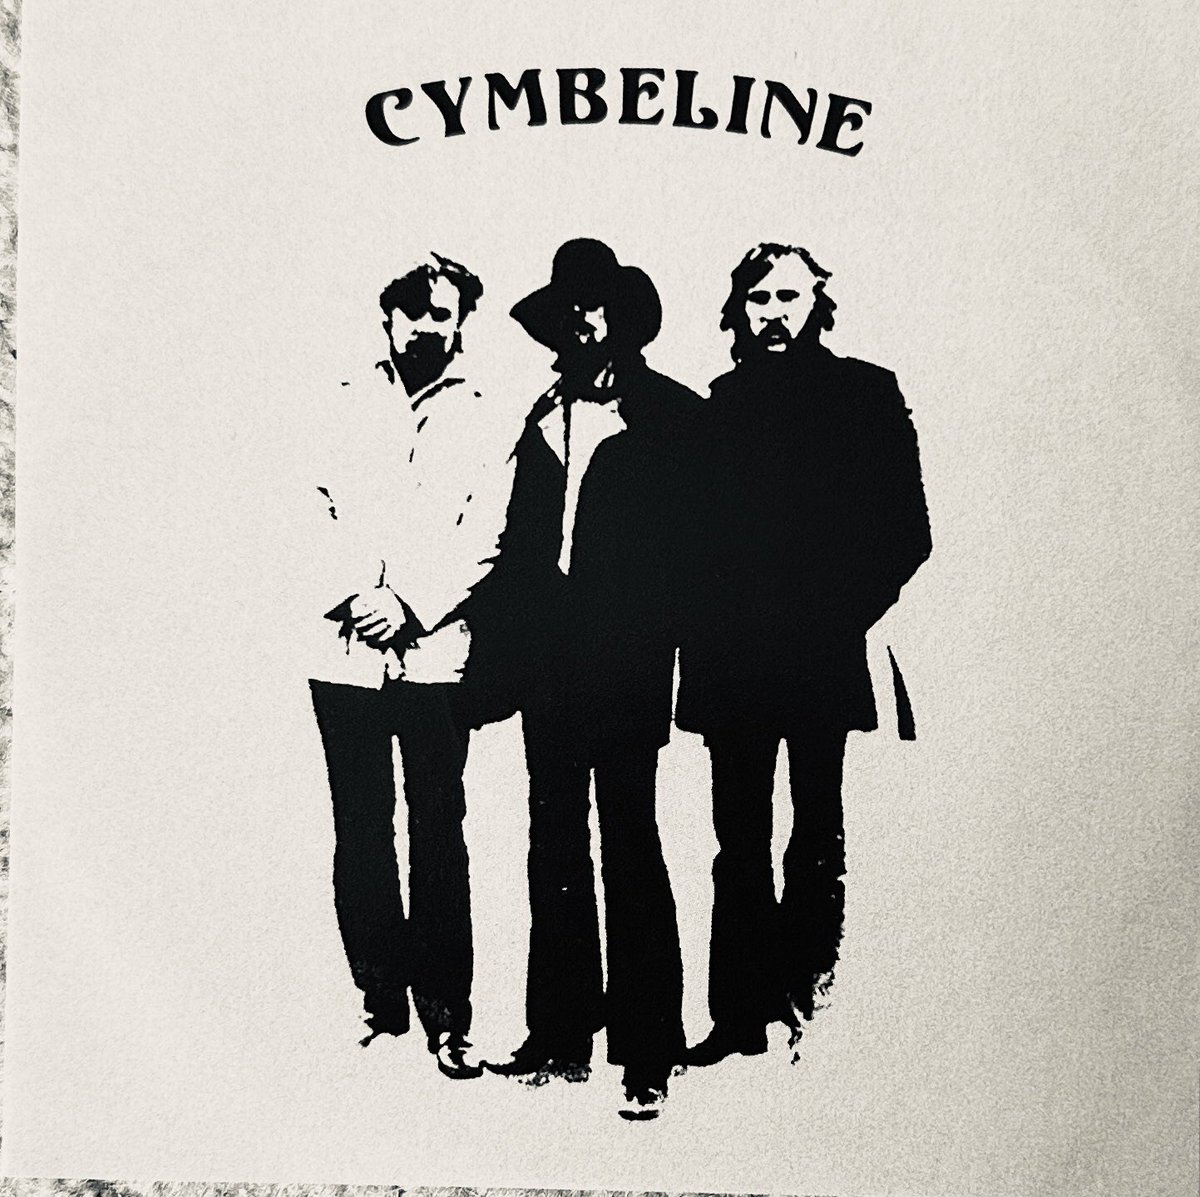 Cymbeline - 1965-1971 On ‘Guerssen’ Formed in Norrköping, Sweden, in mid 60’s DIY fuzzy psych, avant-garde, experimental folk & rock Released one 45’ before disbanding, but they recorded a ton of excellent stuff, only released now… One of the great ‘lost’ exciting bands…